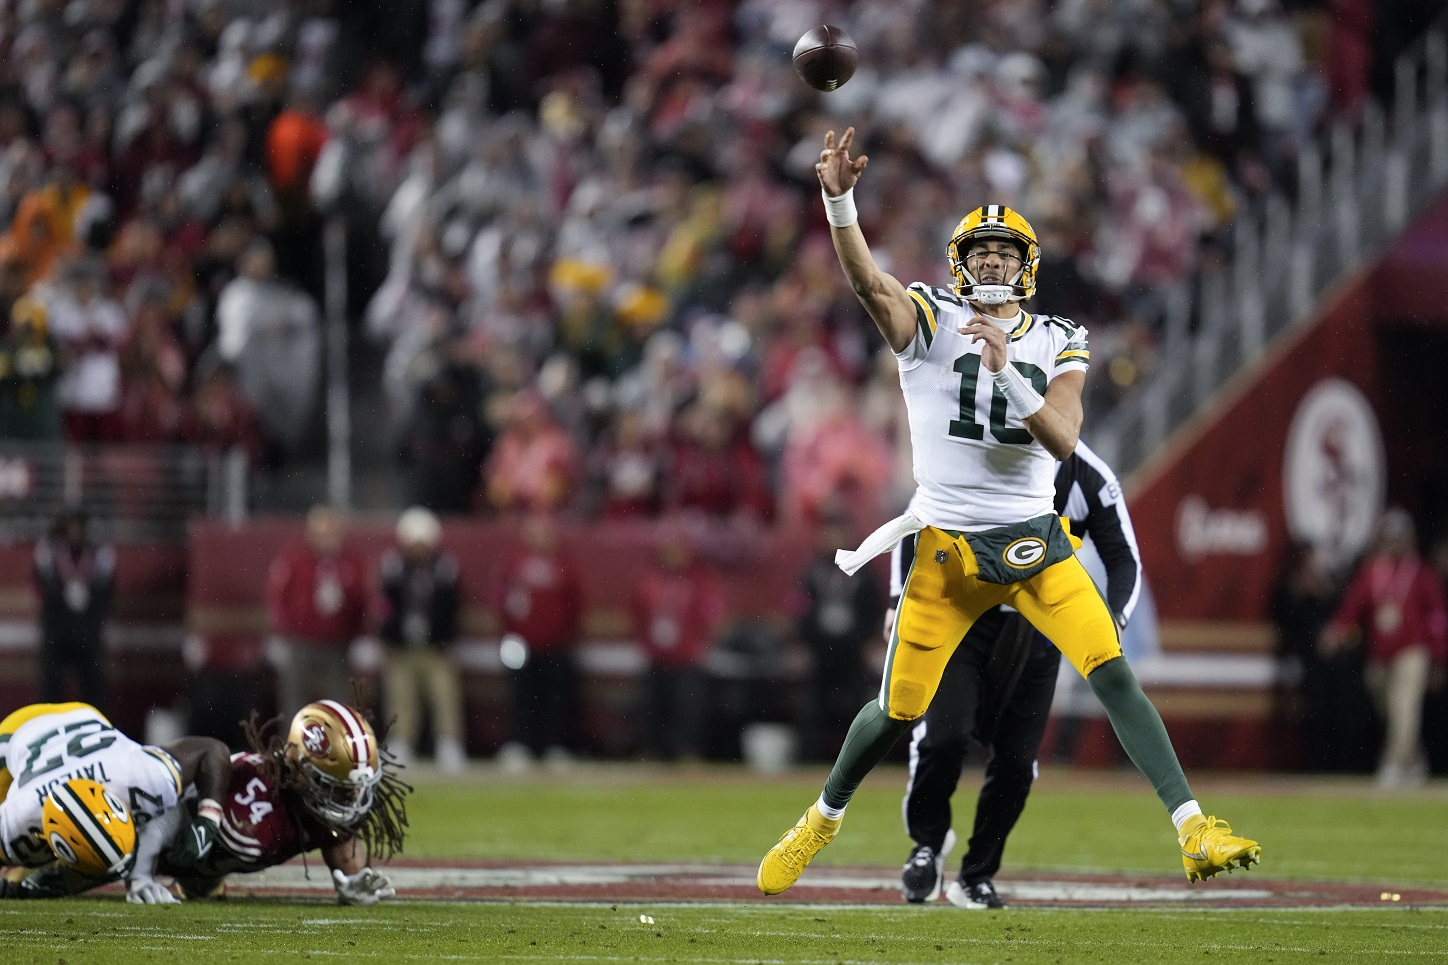 Jordan Love’s strong 1st season as Packers QB ends with disappointing playoff loss